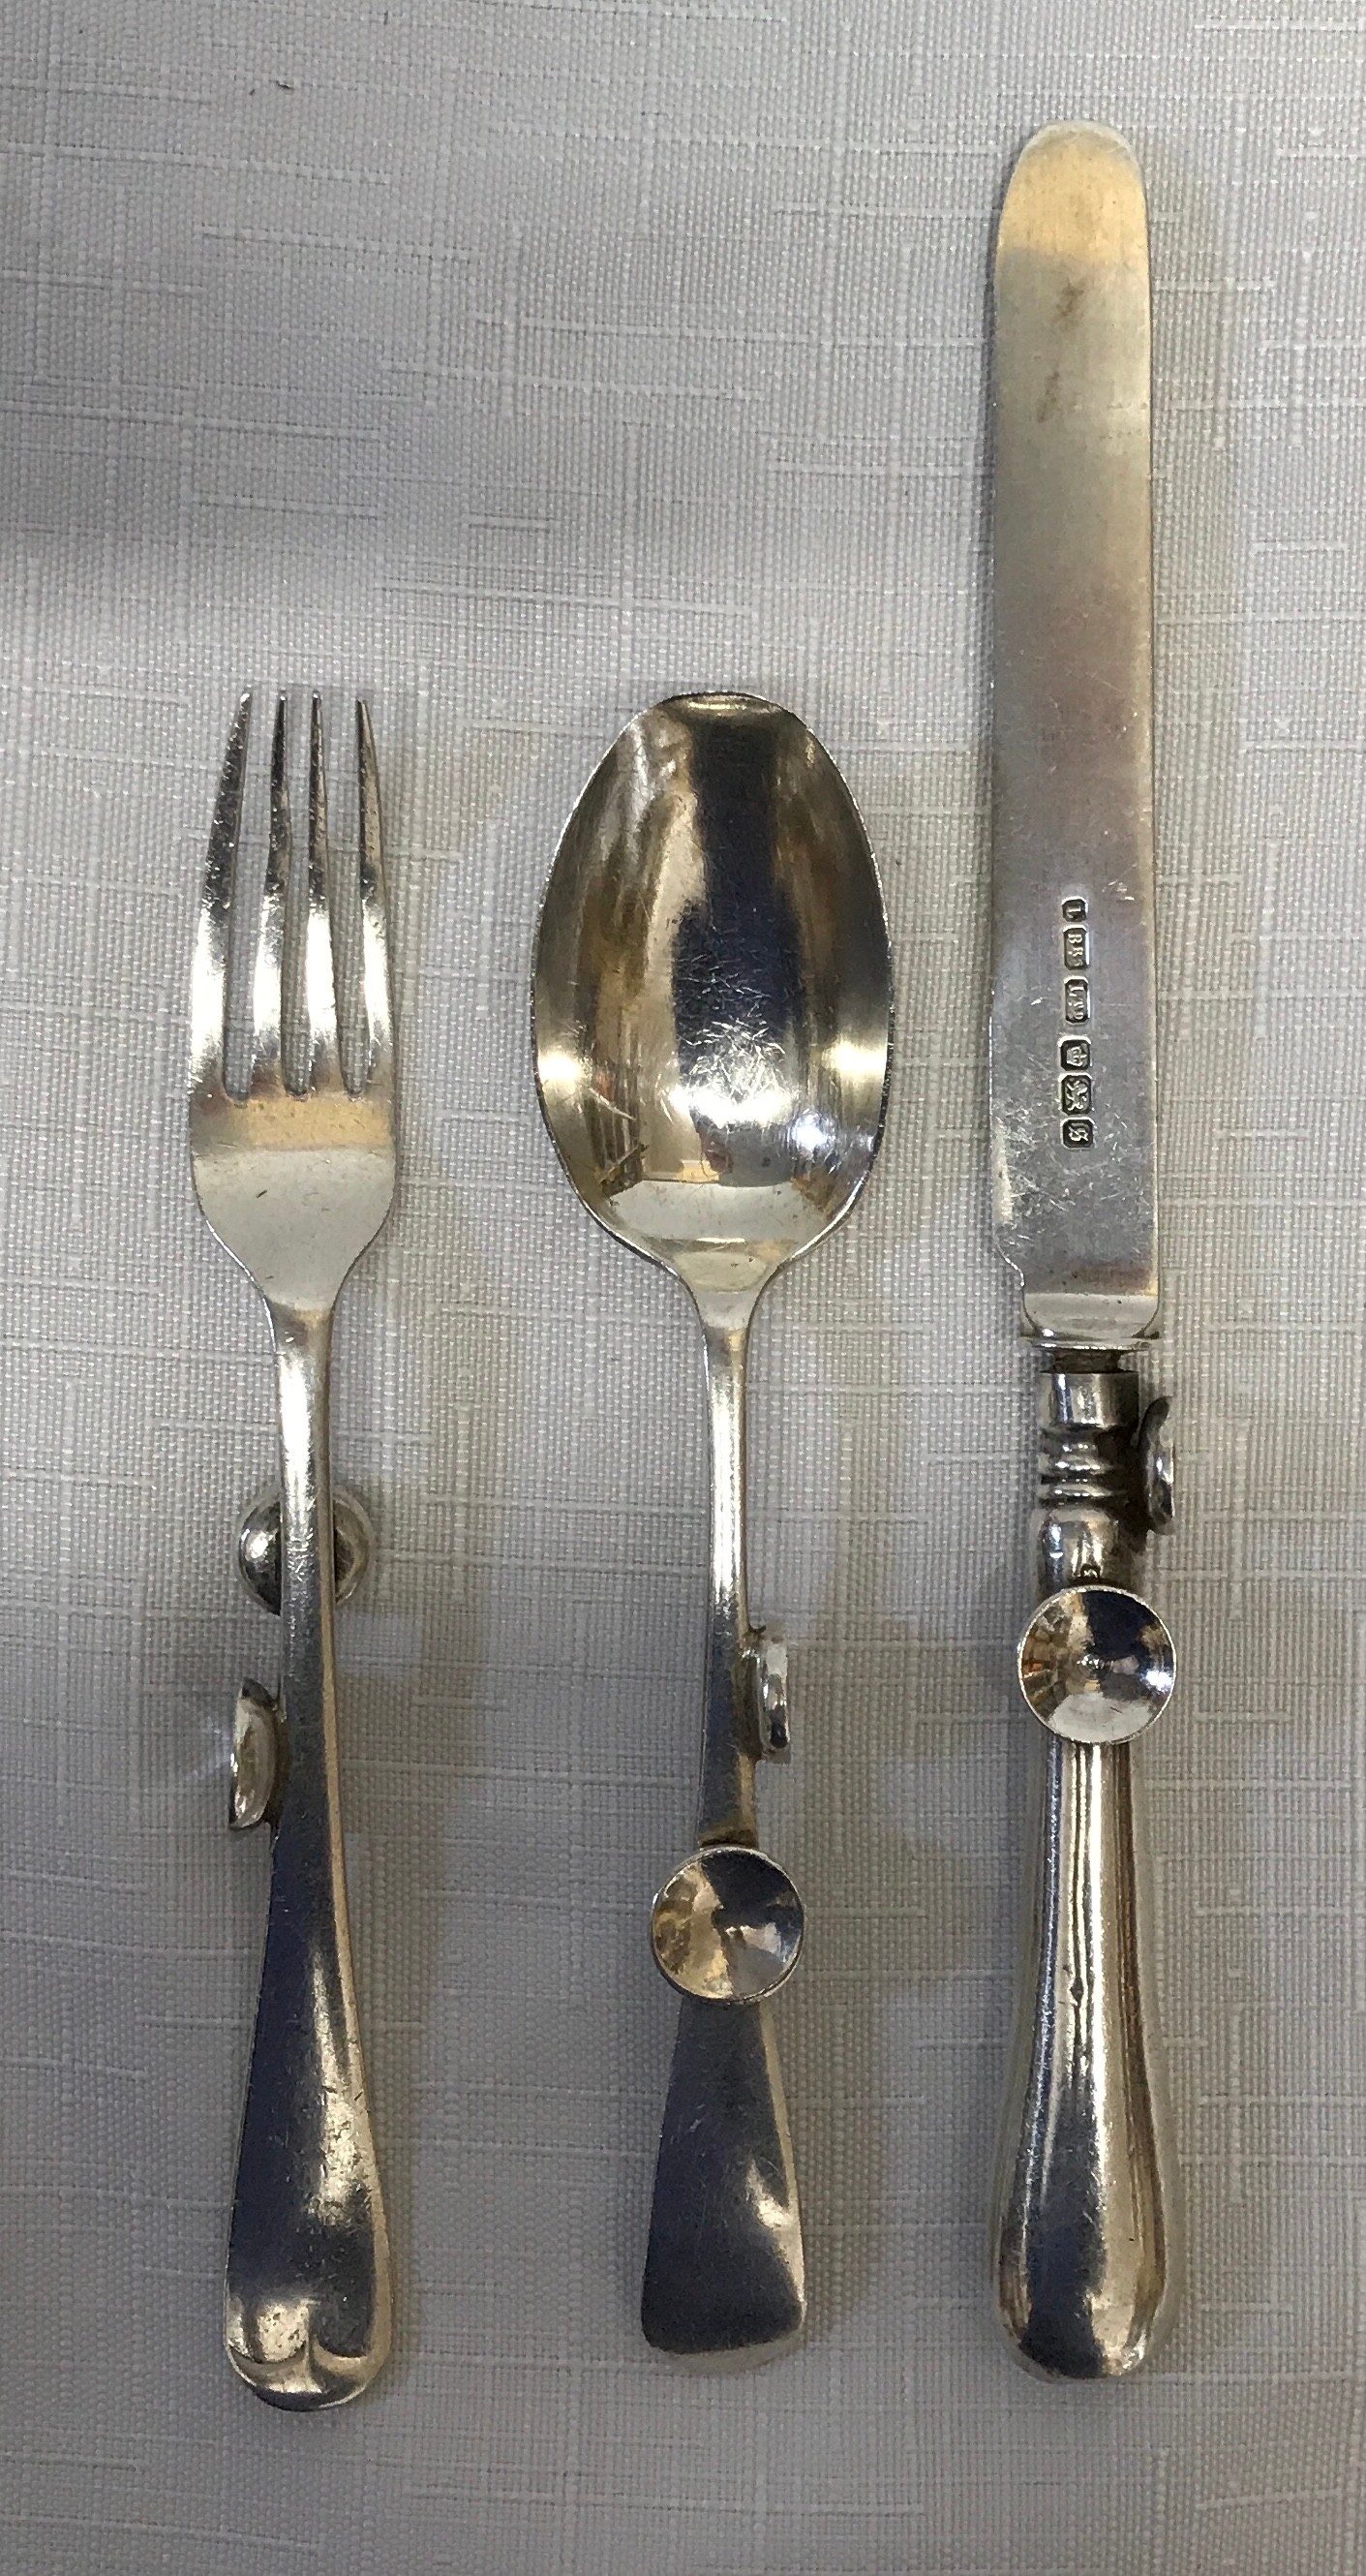 A Silver cutlery set, Sheffield 1910 L BRS Ltd with ergonomic design possibly for infants due to